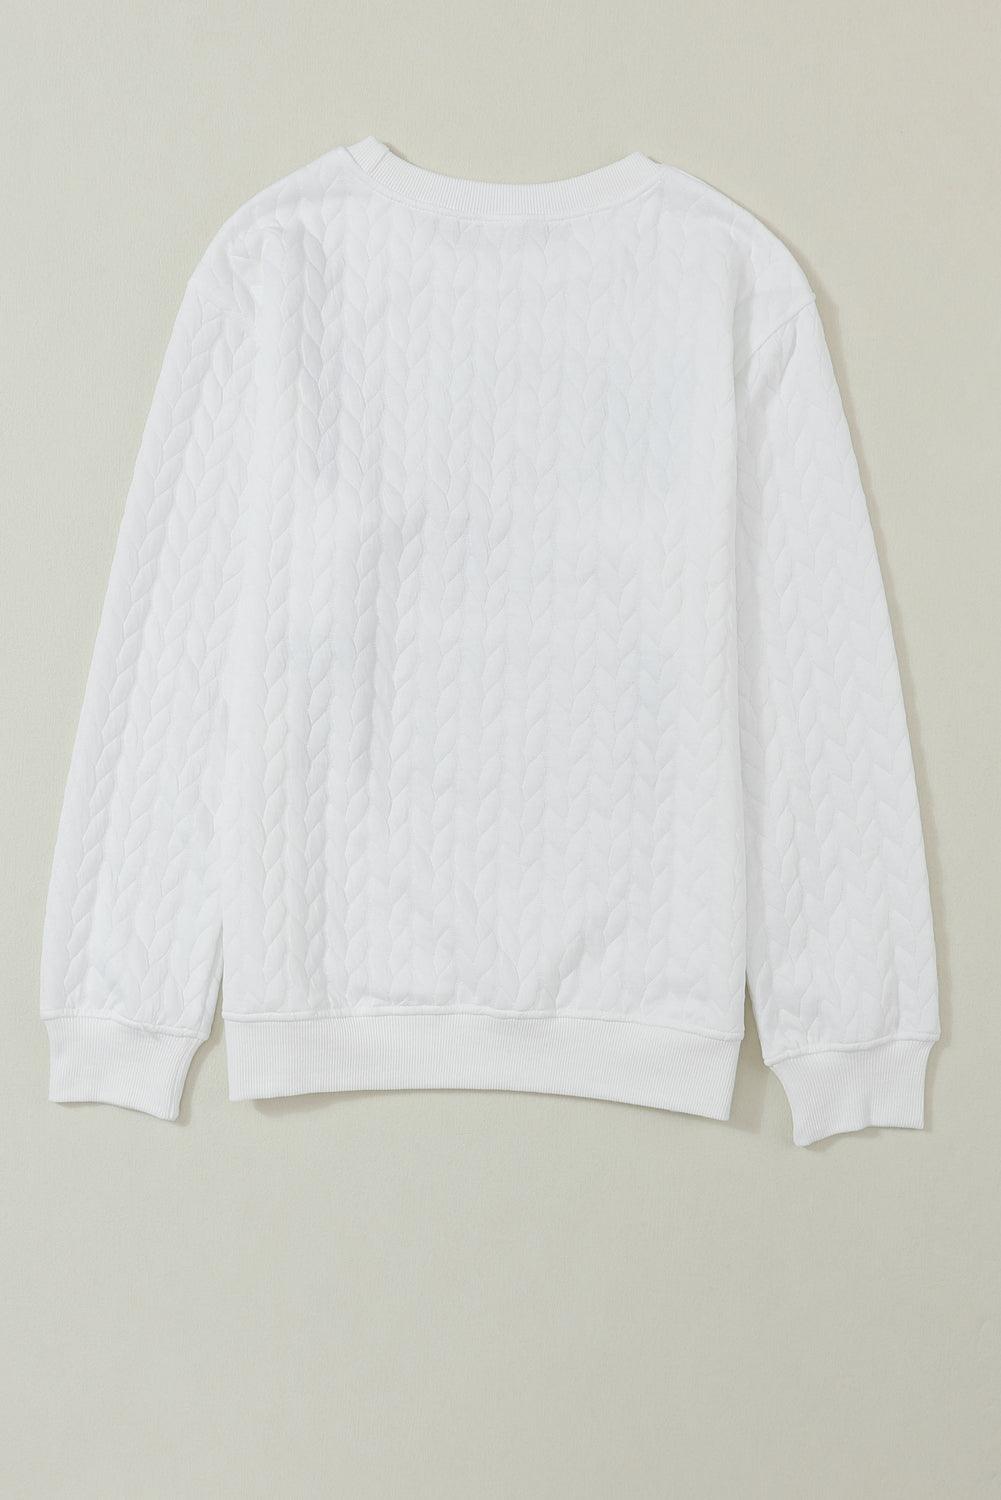 White Merry And Bright Cable Knit Pullover Sweatshirt - L & M Kee, LLC